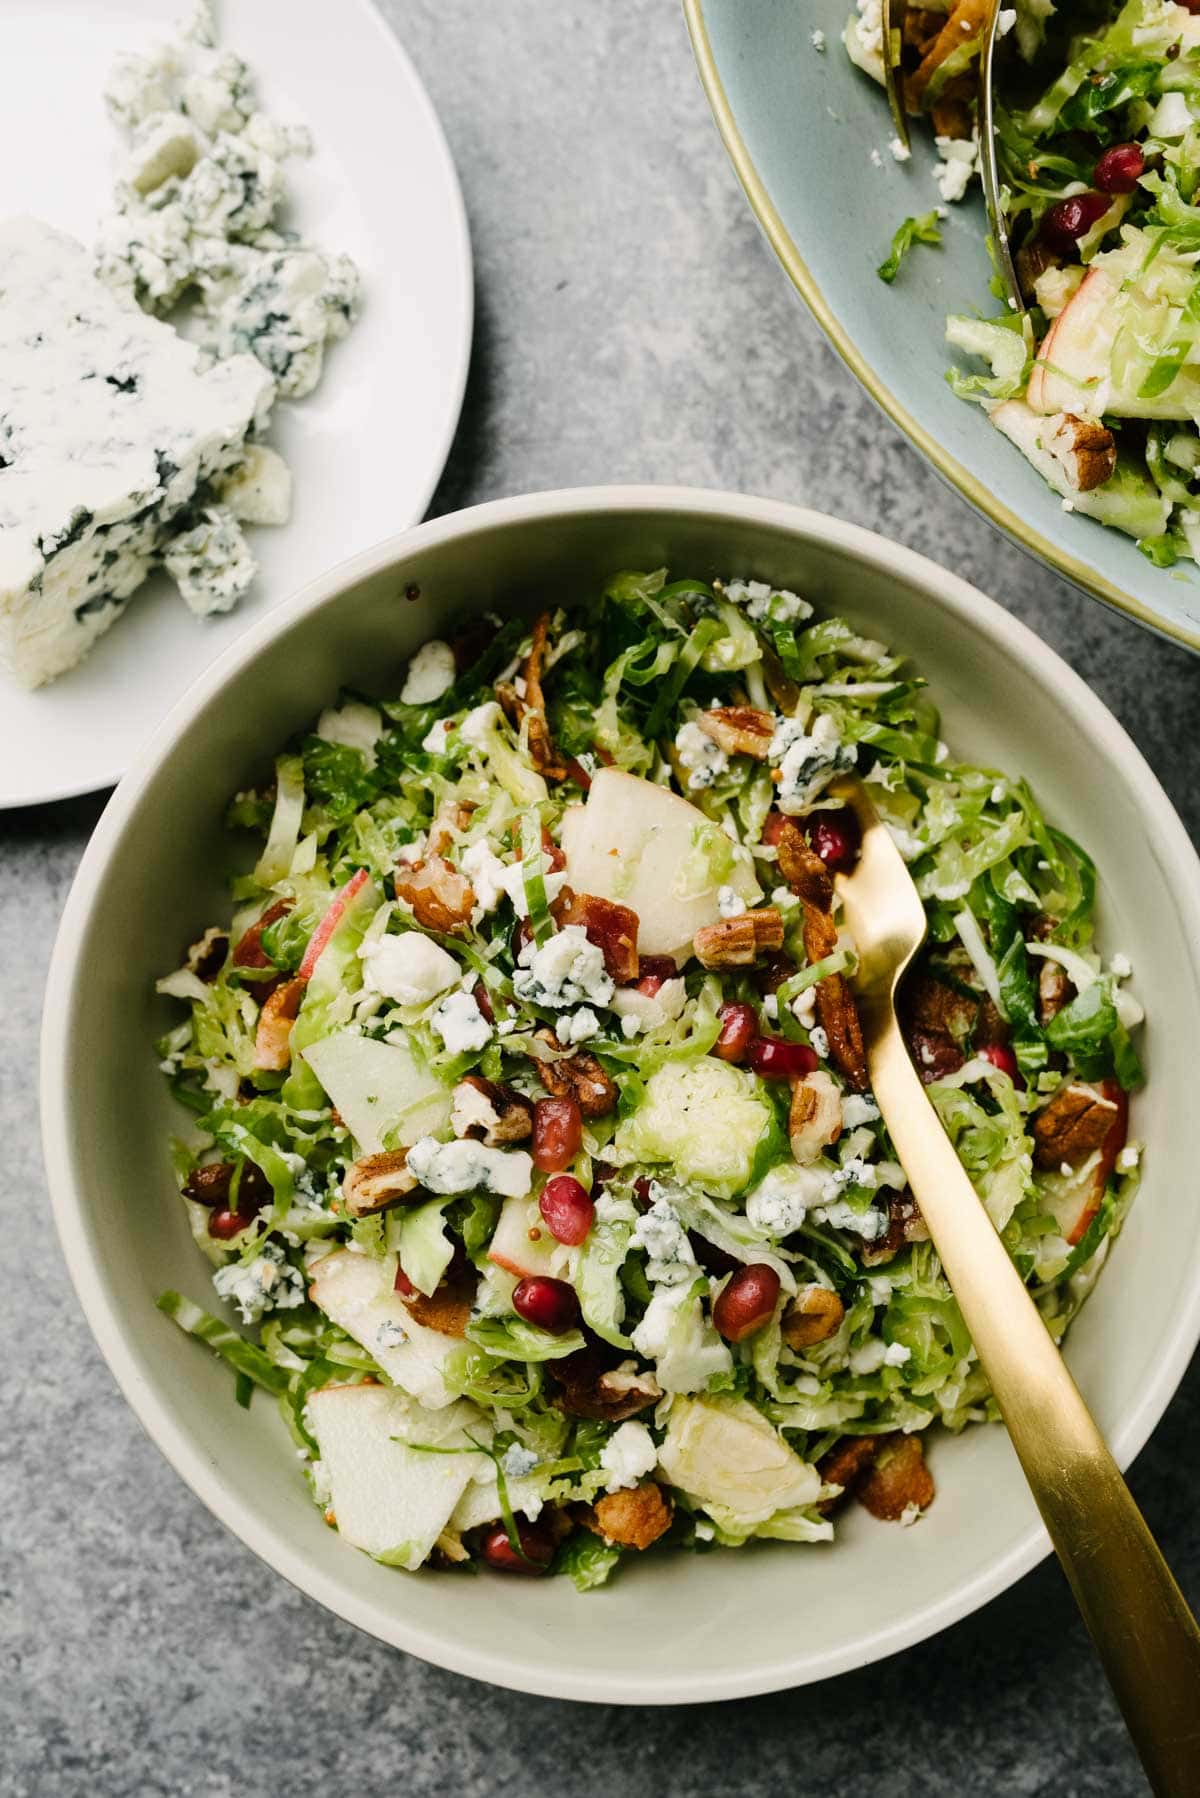 Brussels sprouts salad in a low tan salad bowl with a gold fork; a plate of blue cheese crumbles to the side.